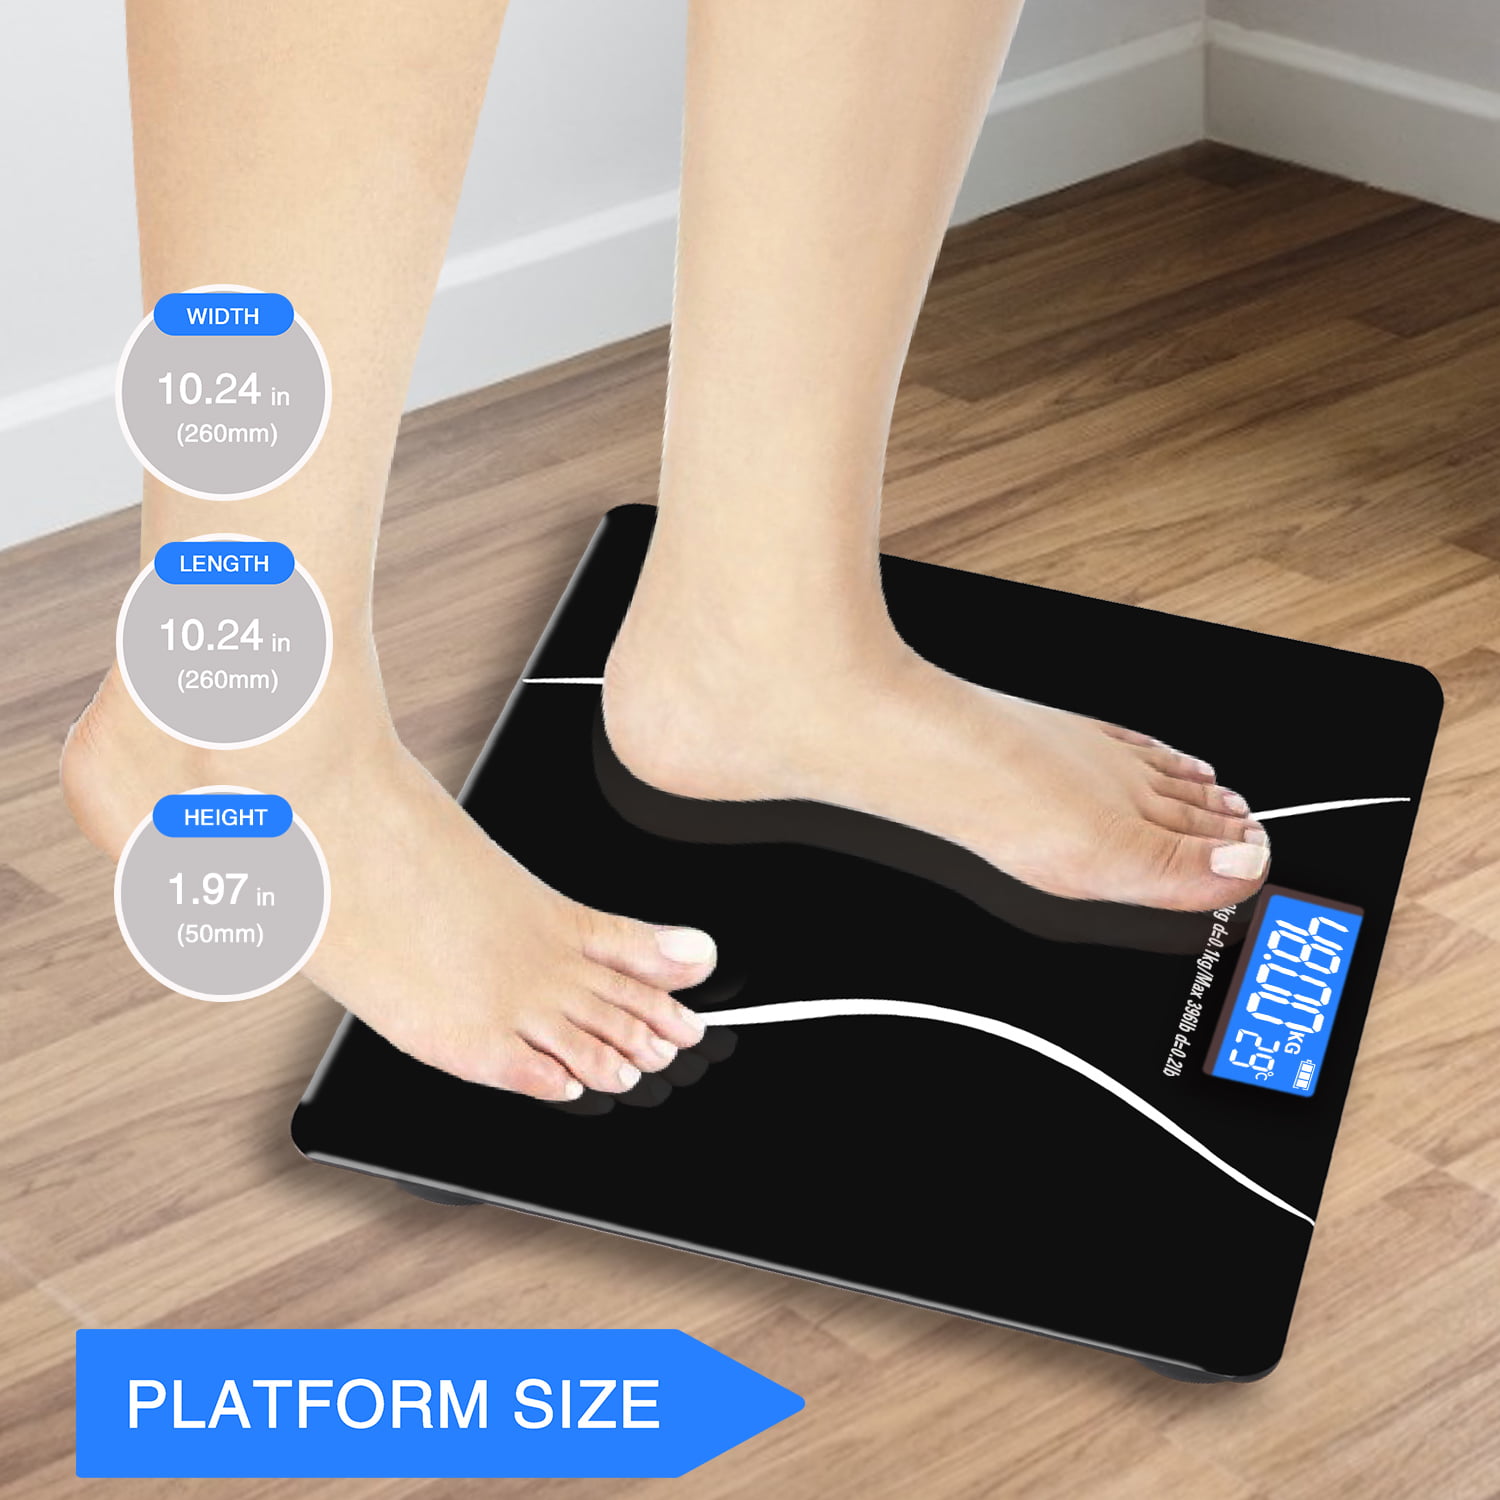 EnerPlex Scale for Body Weight - Accurate Digital BMI Bathroom and Home  Scale for Weighing and Home Workout - White